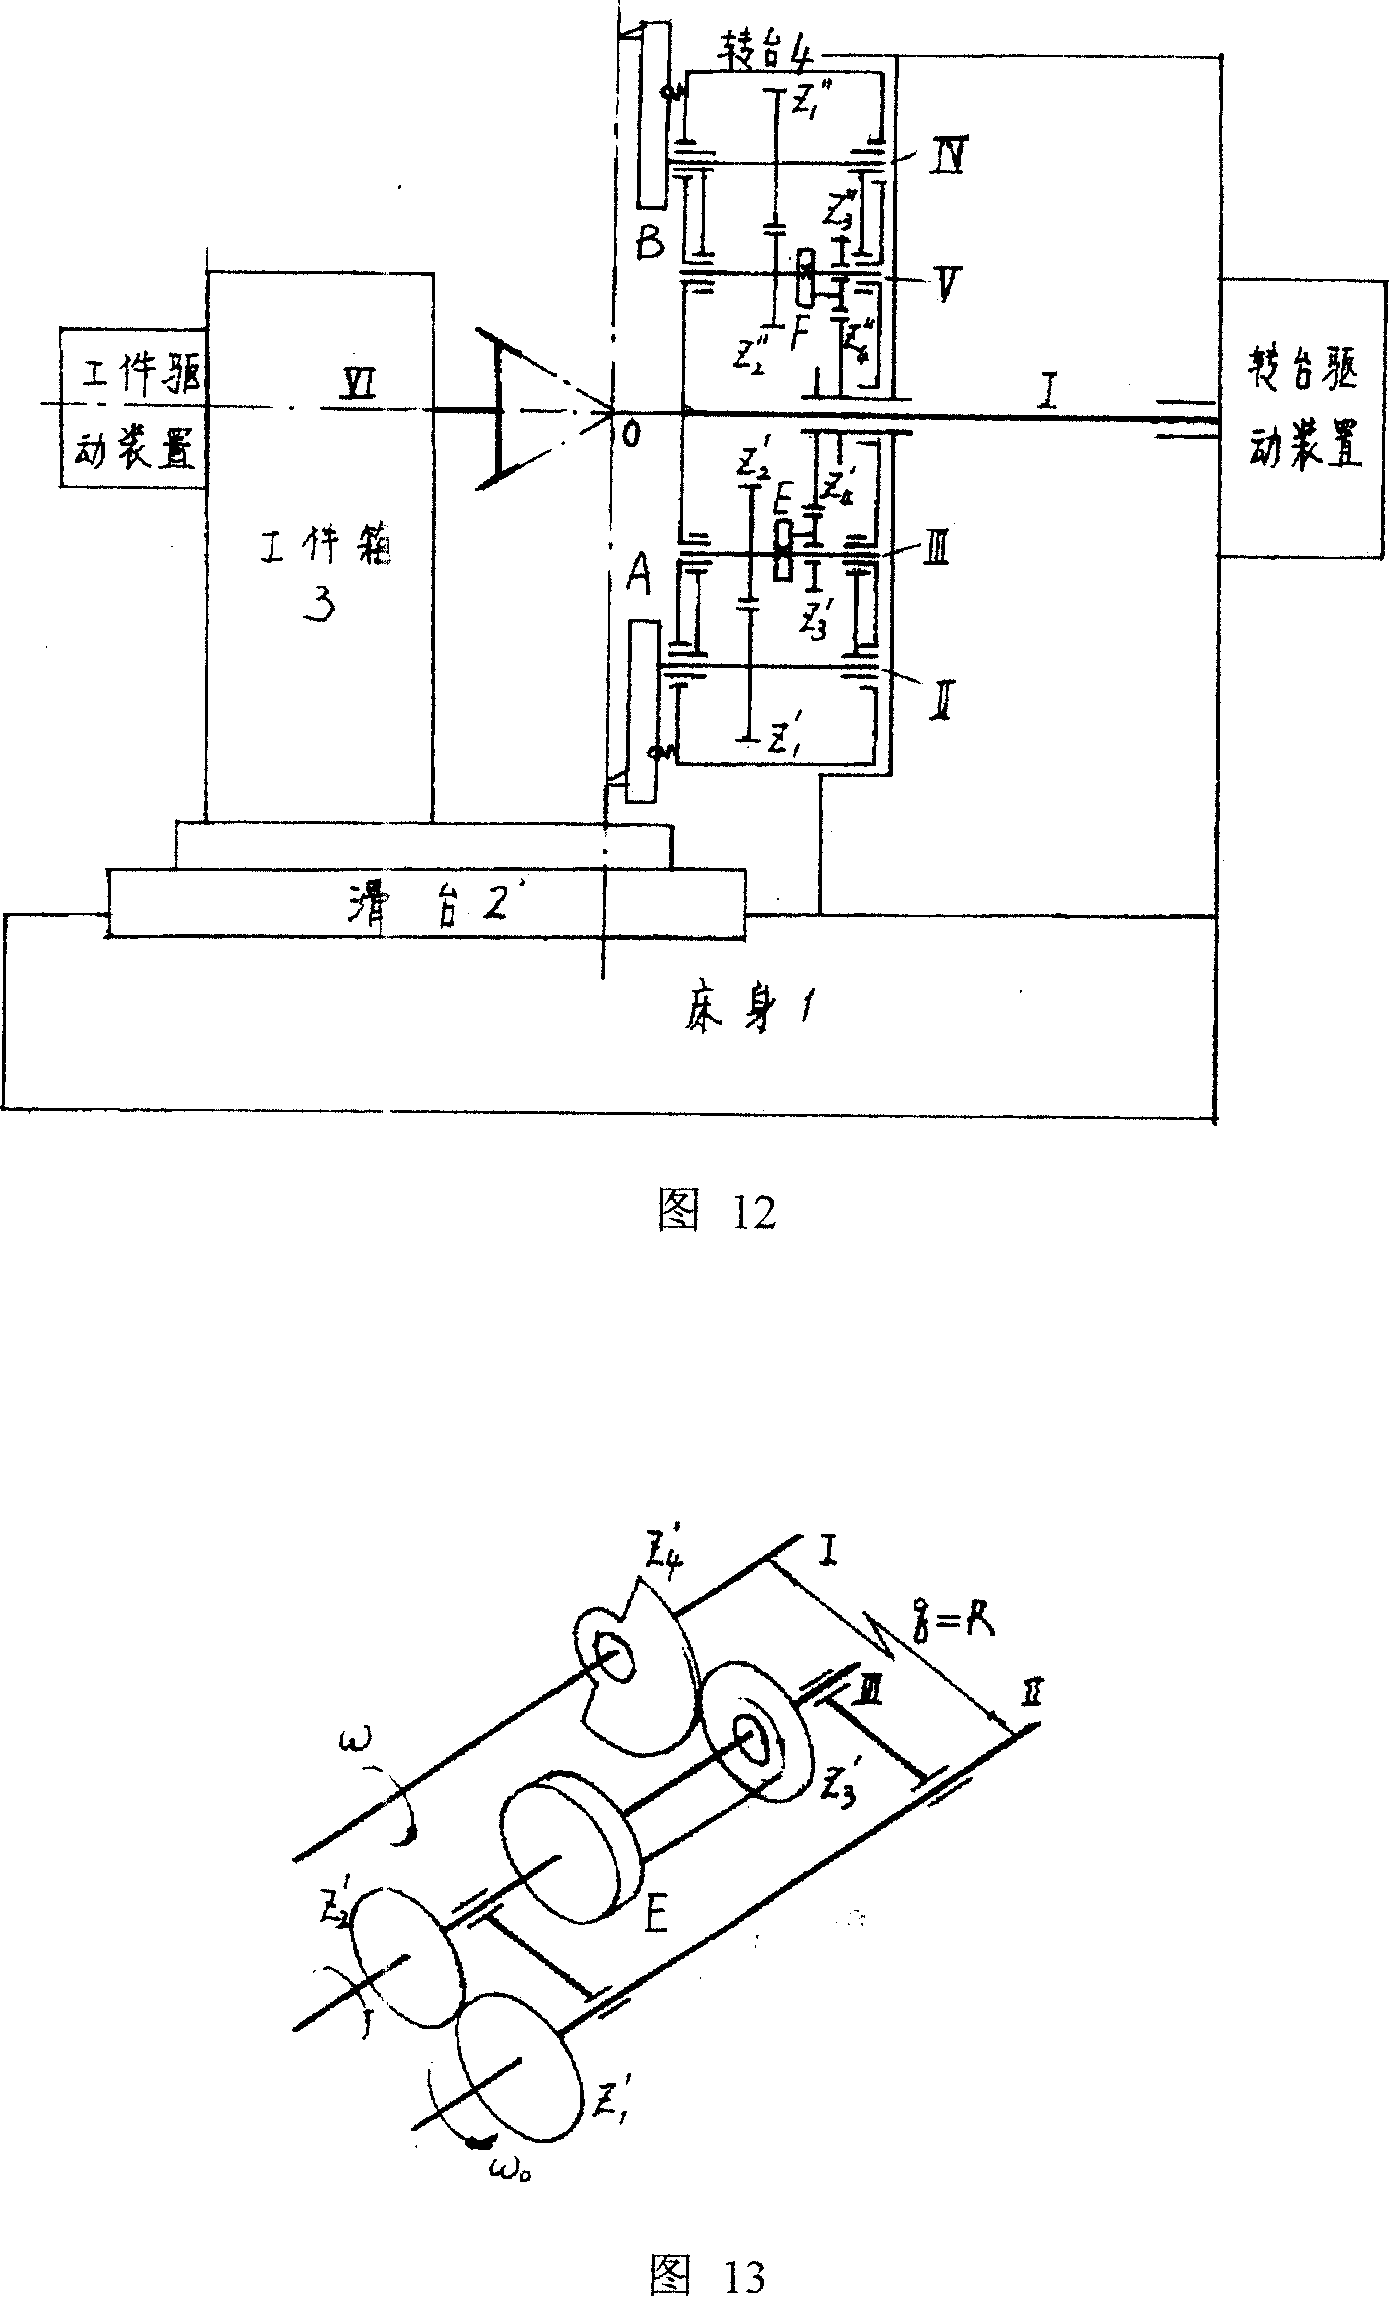 Method for producing cutter teeth of spiral bevel gear with spherical involute profile of tooth tapered tooth